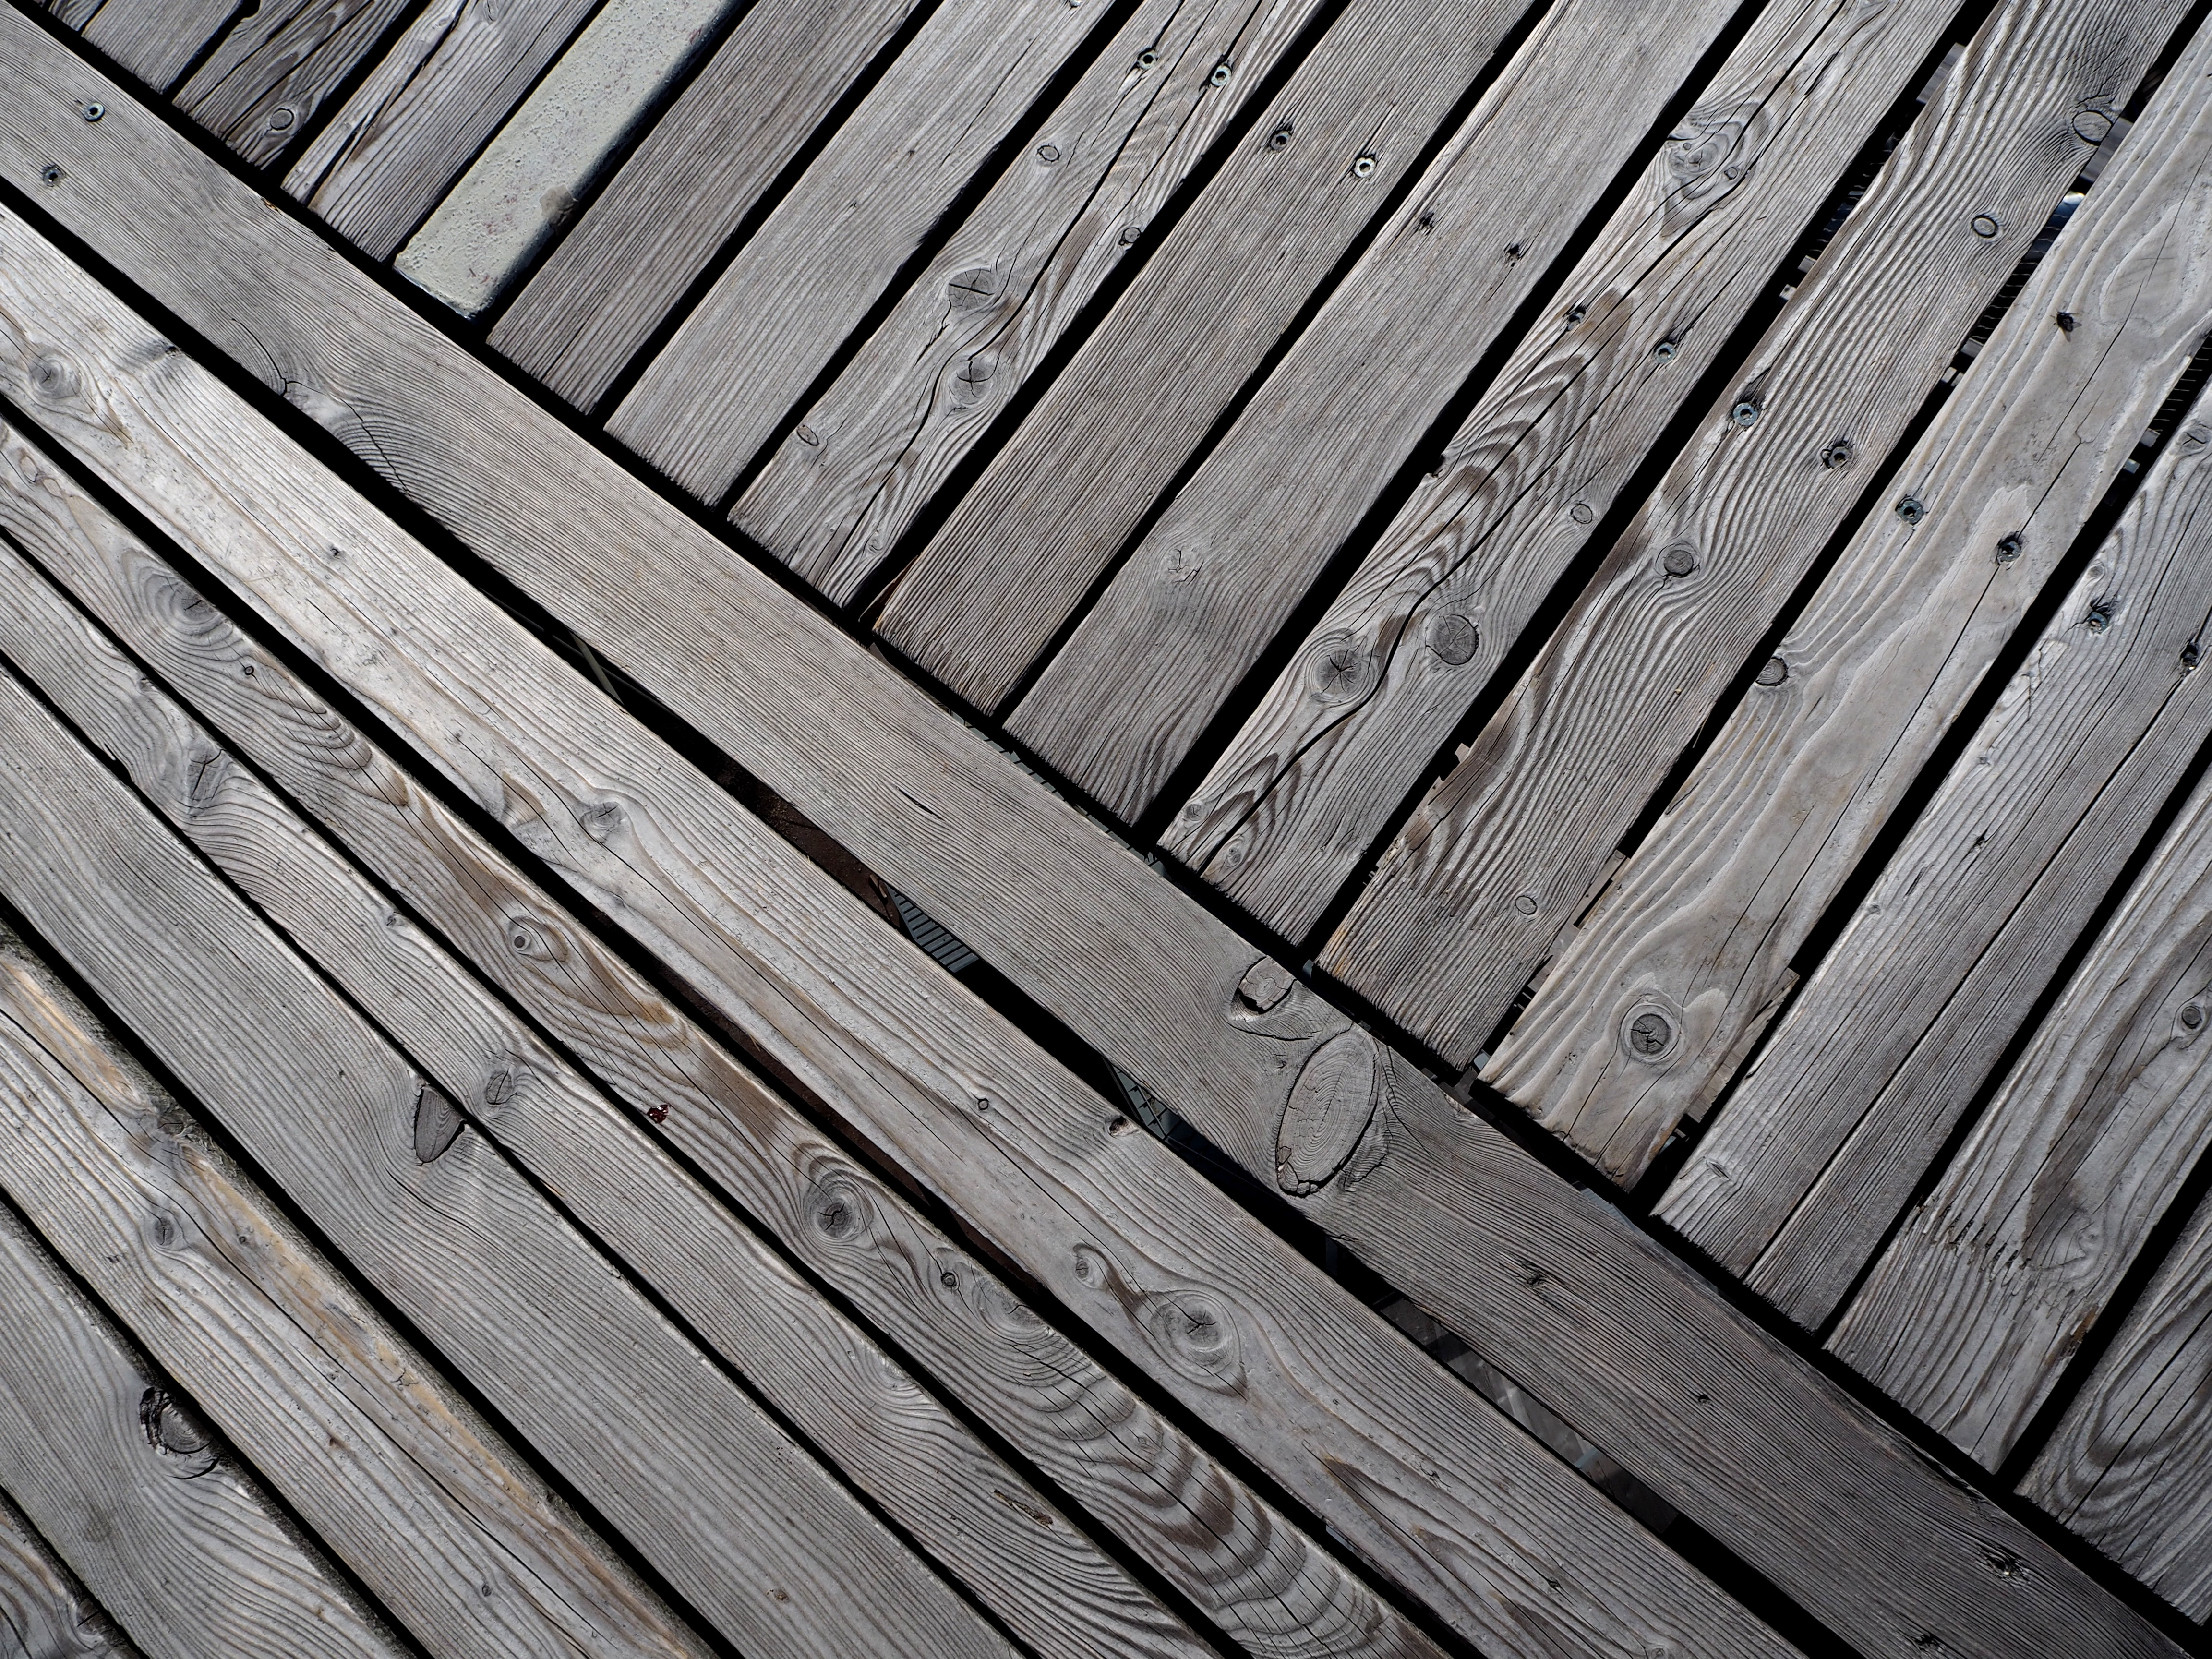 wooden, texture, surface, wood, textures, planks, board lock screen backgrounds